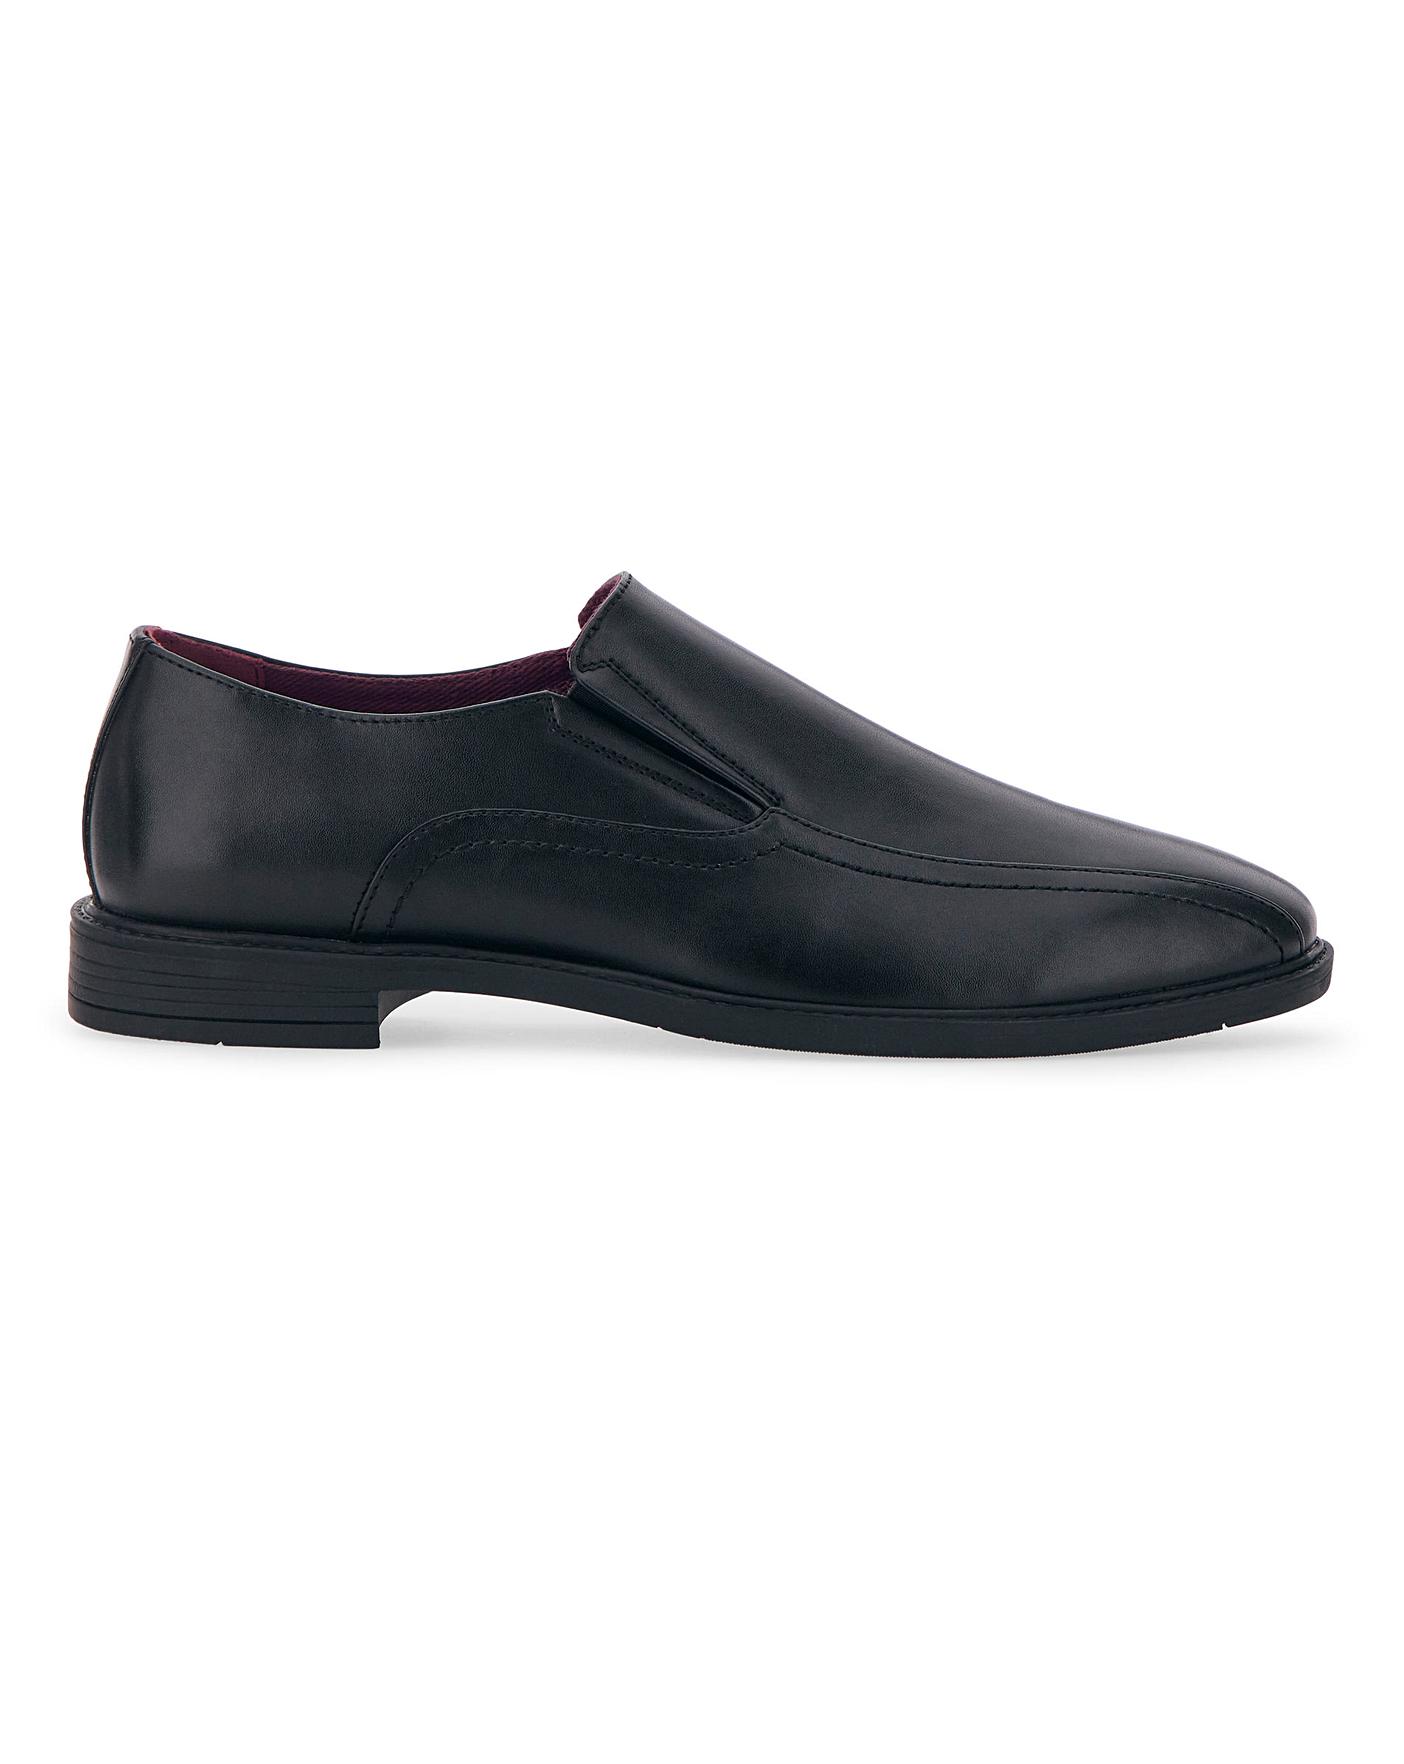 PU Slip On Formal Shoe Extra Wide Fit